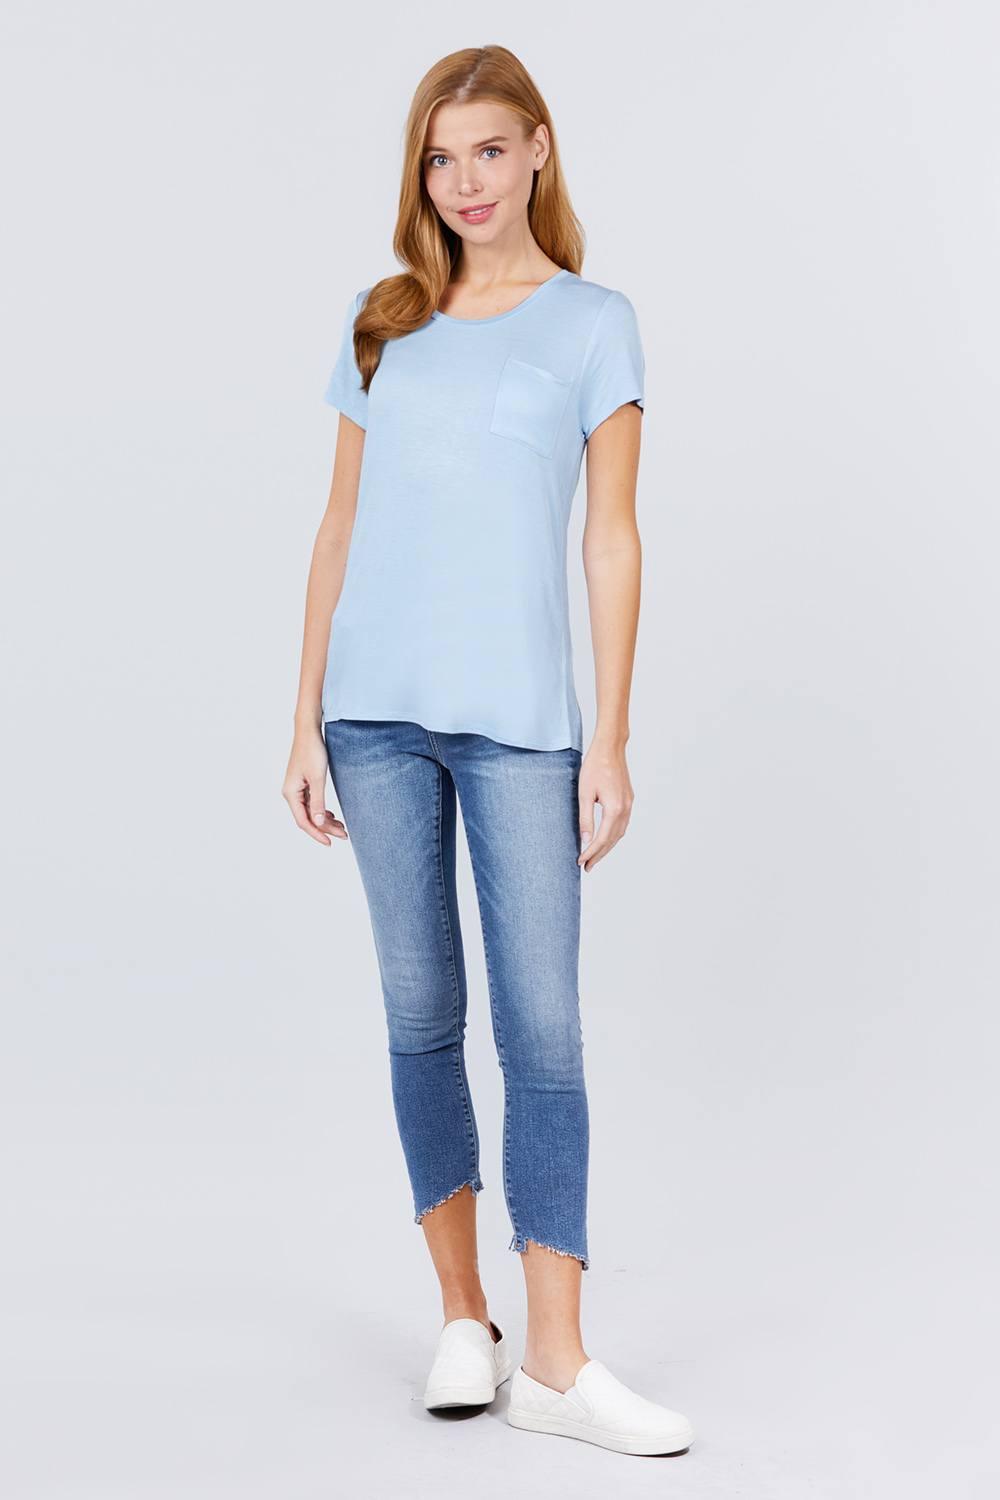 Short Sleeve Scoop Neck Top With Pocket - Kreative Passions